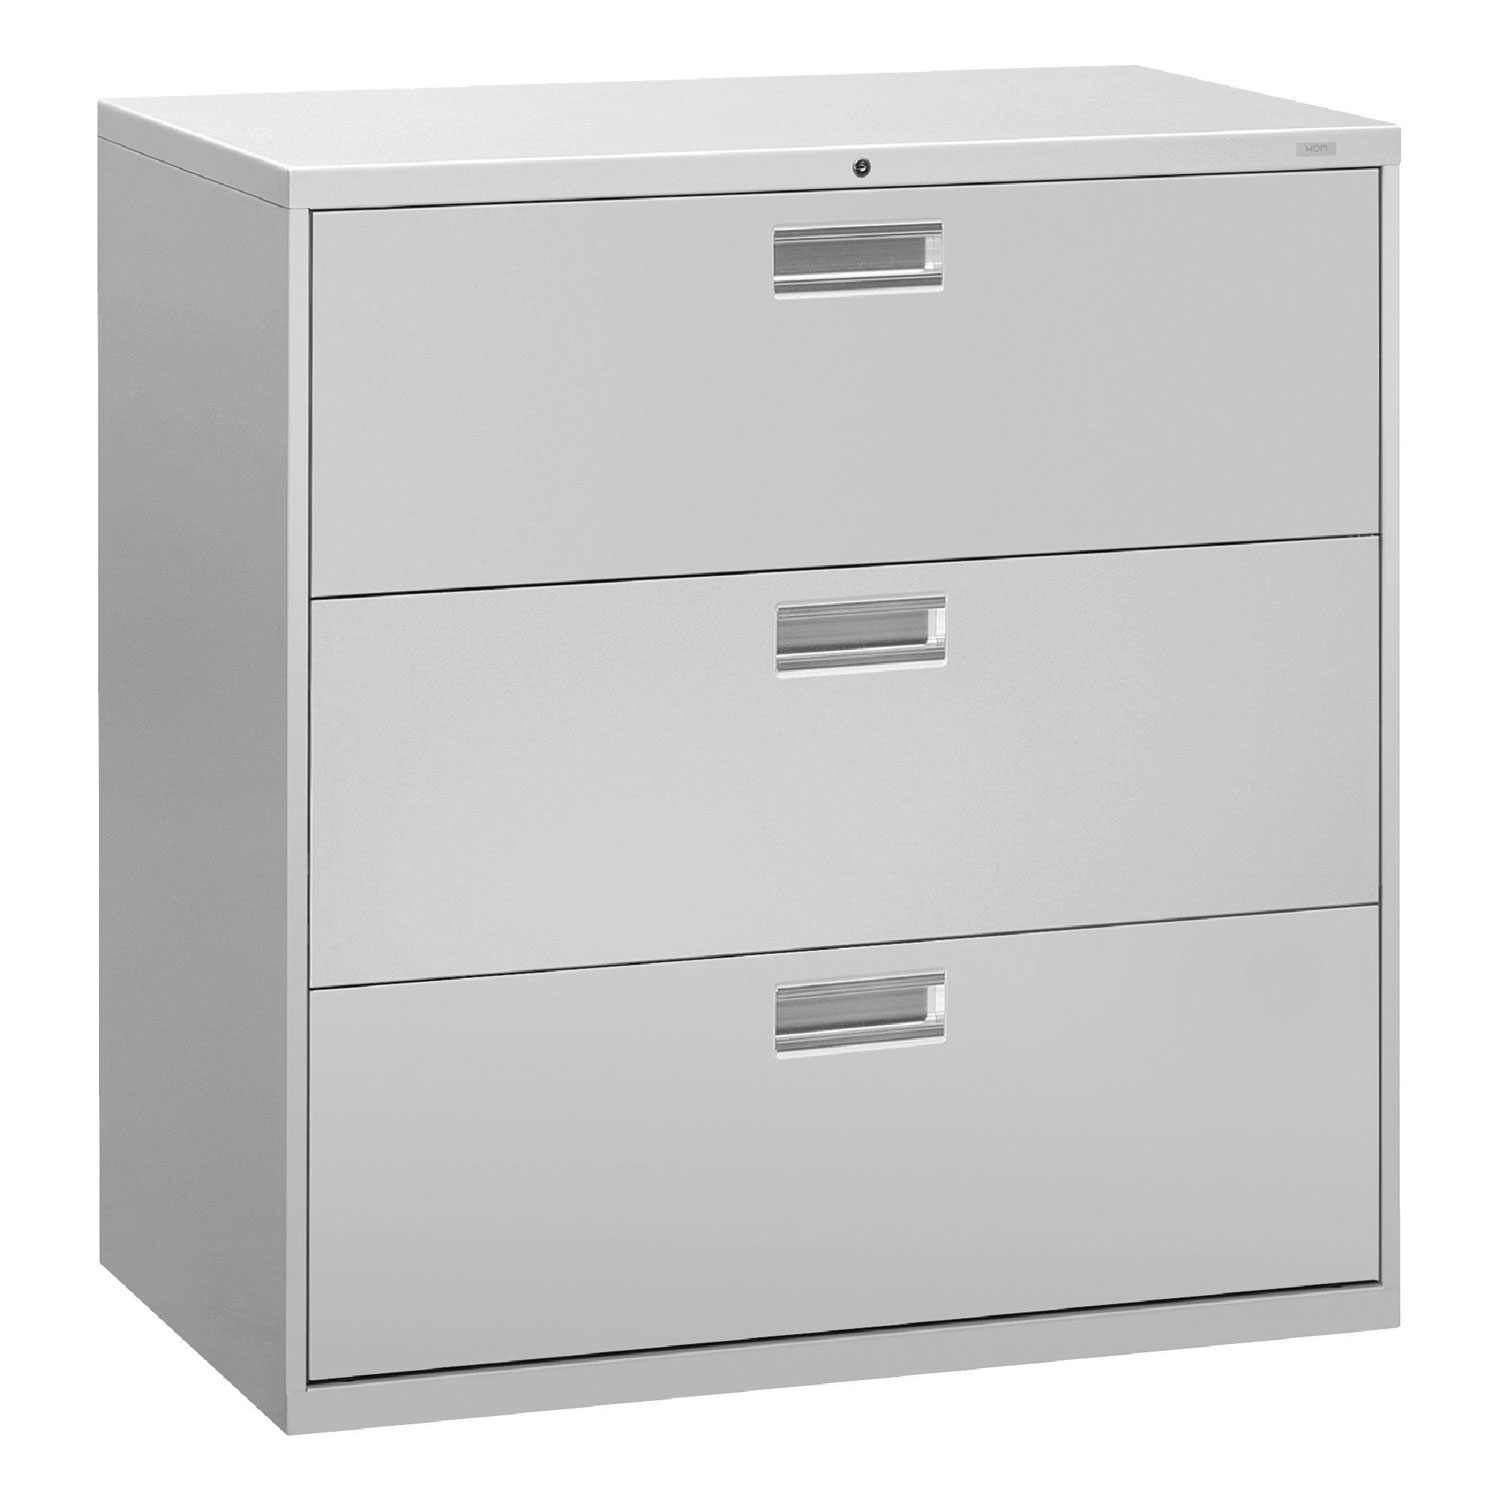 600 Series Three-Drawer Lateral File, 42w x 19-1/4d, Light Gray